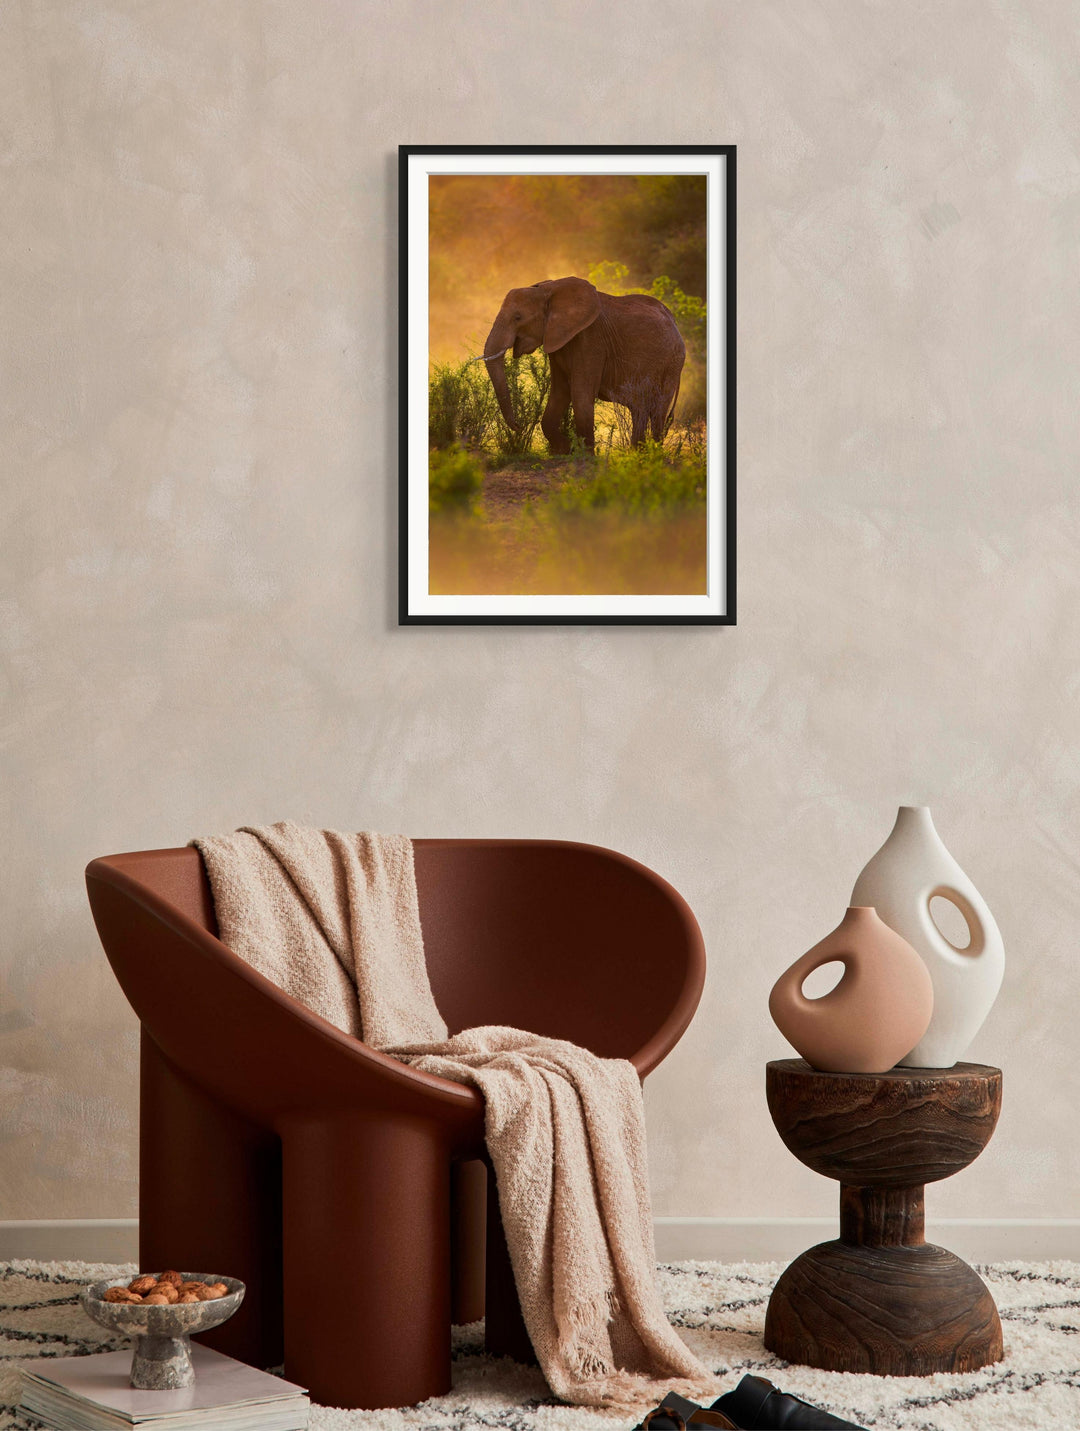 Fine art framed photograph: In Laikipia County, Kenya, the last light bathes a lone elephant in golden warmth. Amidst drought, nature's resilience and the elephant's majesty endure. By Thomas Nicholson